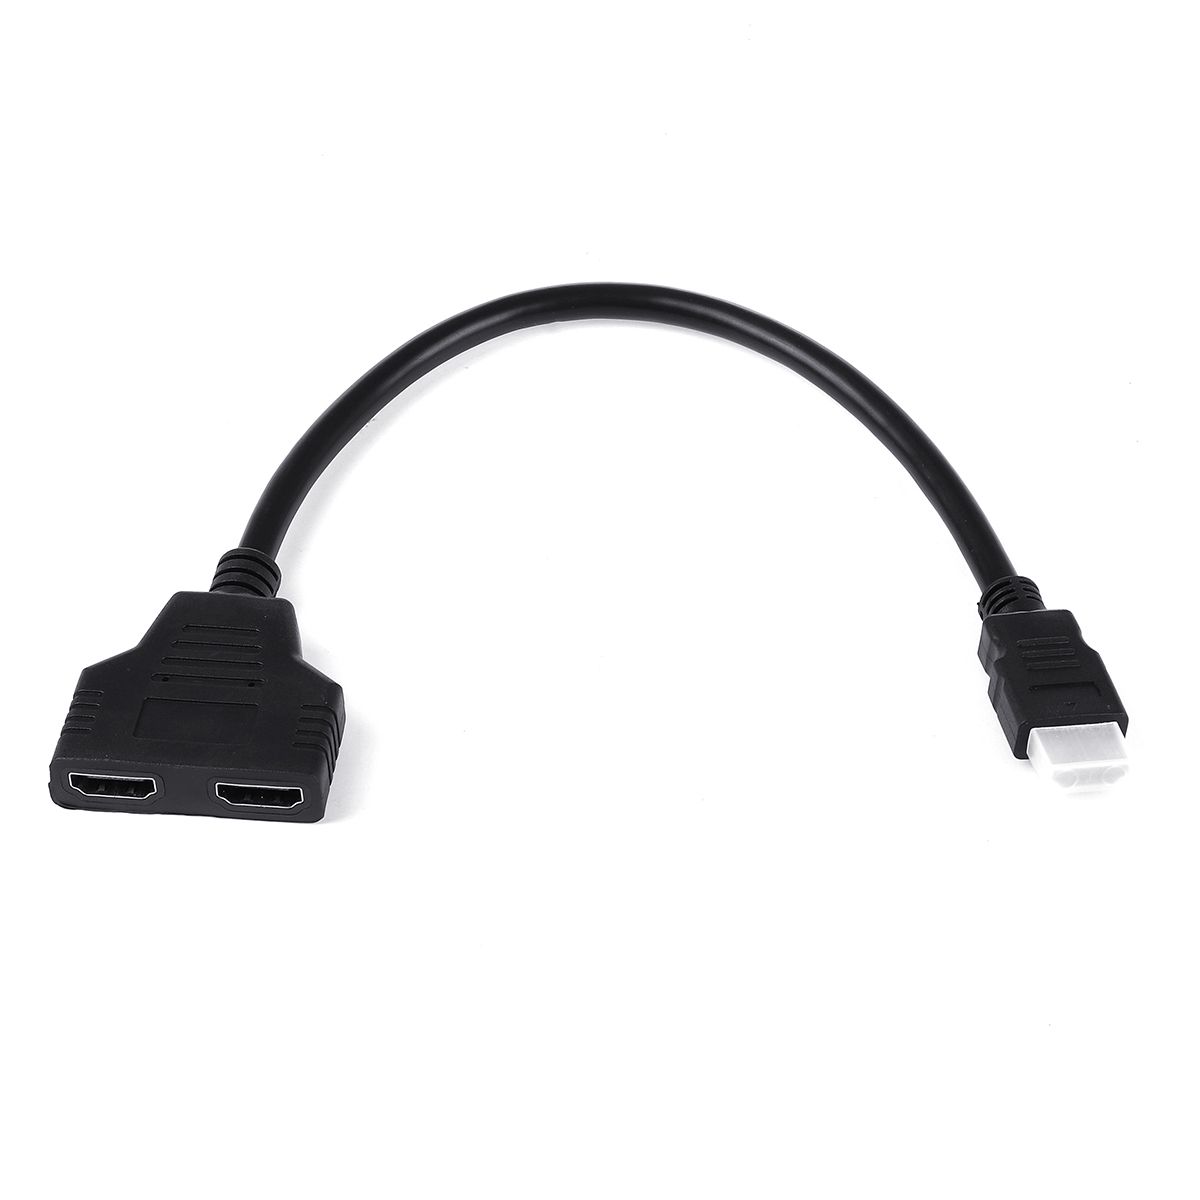 1080P-HDMI-Cable-Splitter-Adapter-20-Converter-1-In-2-Out-1-Male-to-2-Female-1759883